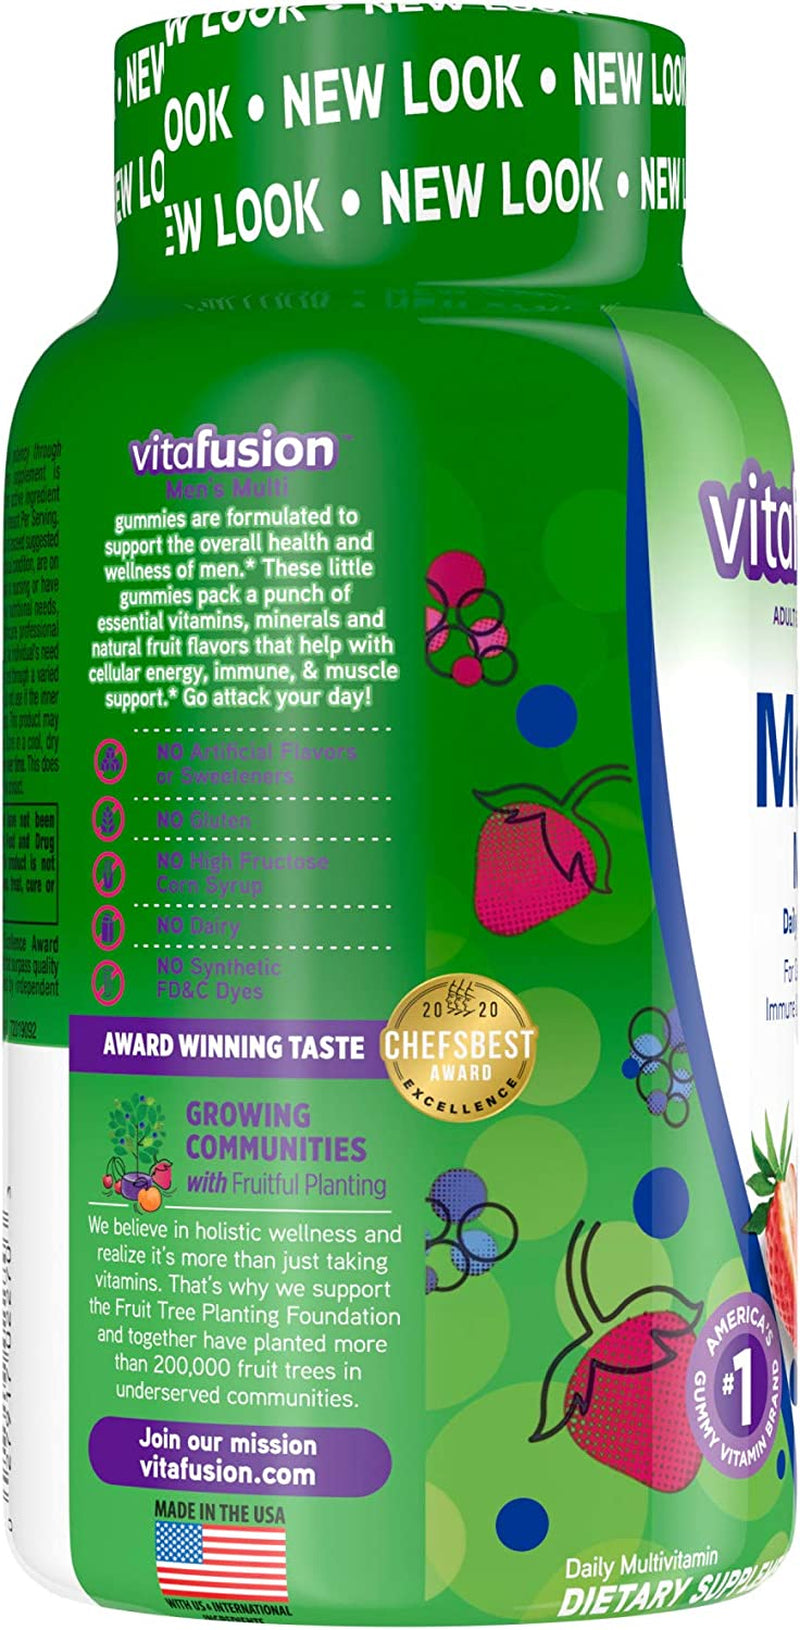 Vitafusion Adult Gummy Vitamins for Men, Berry Flavored Daily Multivitamins for Men with Vitamins A, C, D, E, B6 and B12, America’S Number 1 Gummy Vitamin Brand, 75 Day Supply, 150 Count